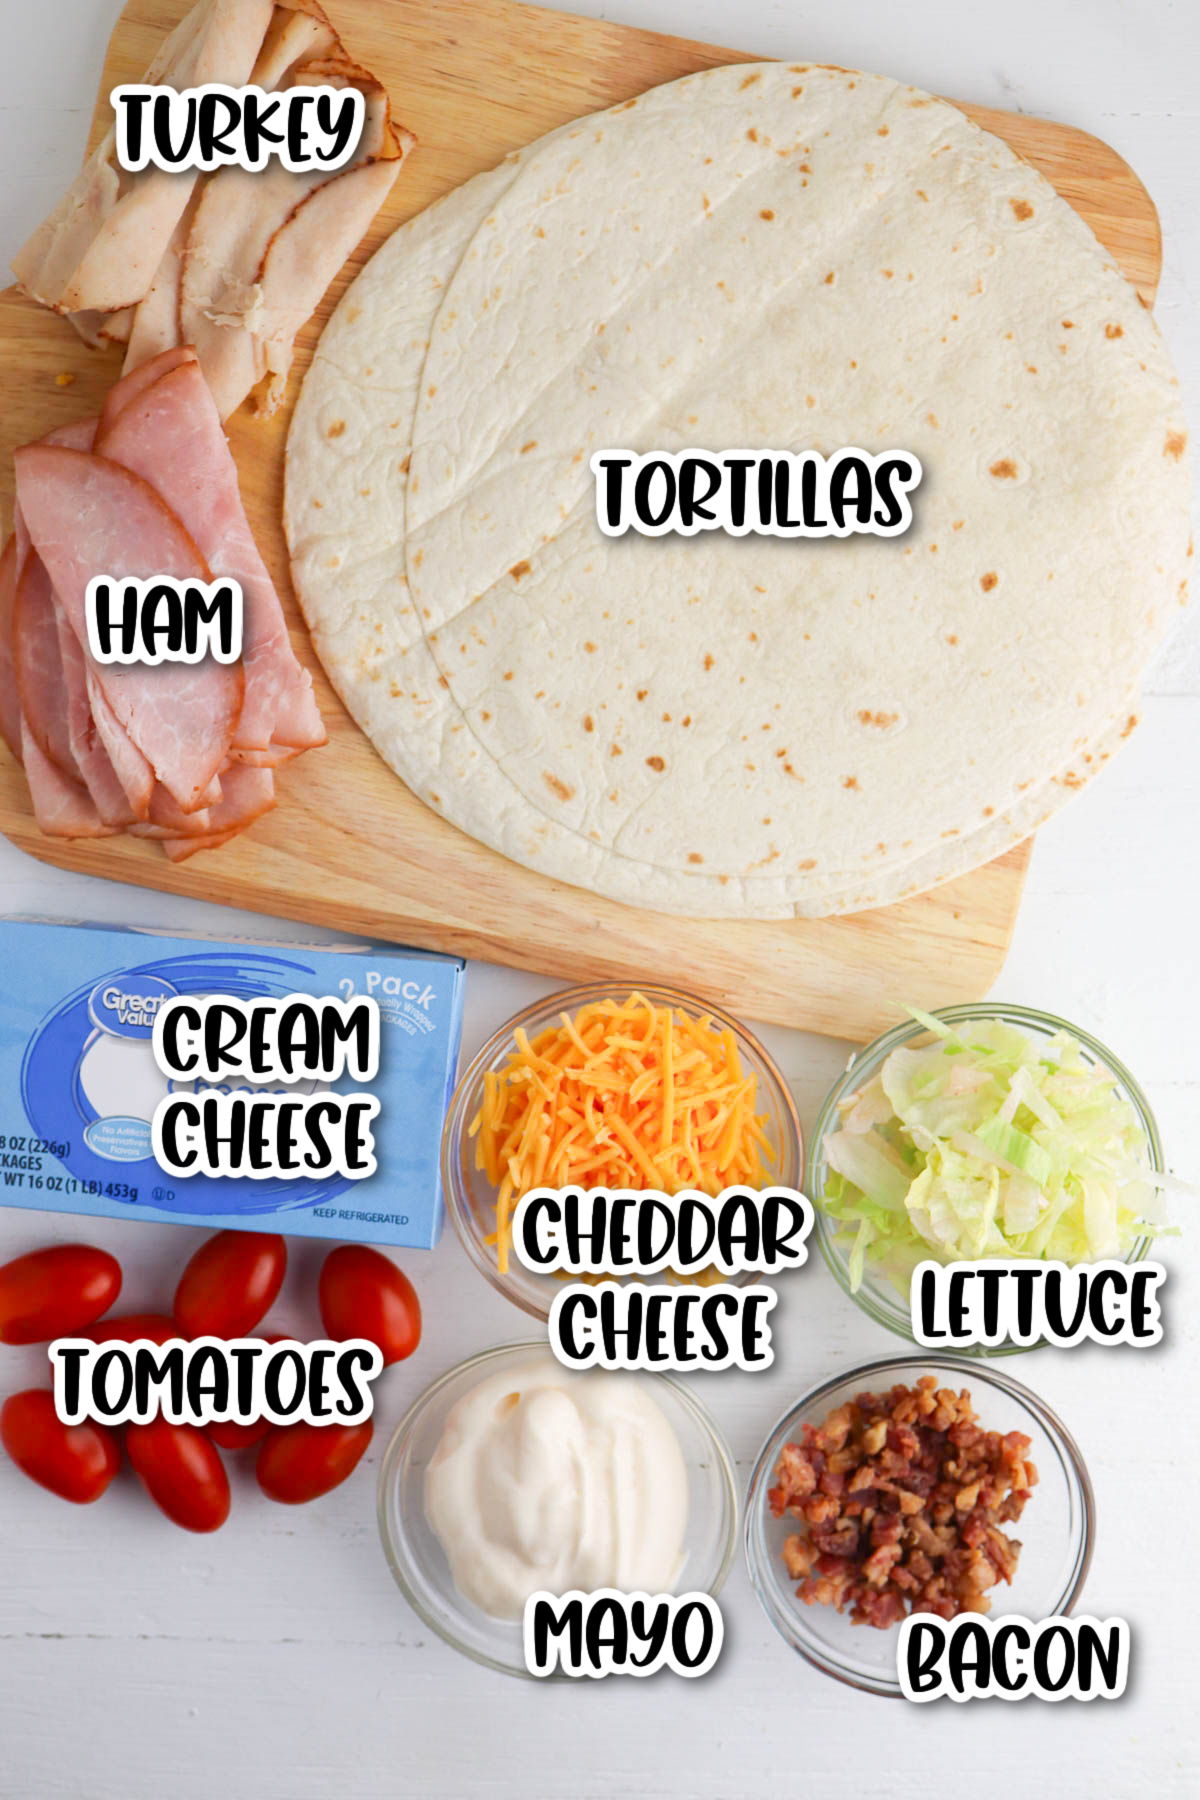 Ingredients laid out for making wraps, including tortillas, turkey, ham, cream cheese, tomatoes, cheddar cheese, lettuce, mayo, and bacon.